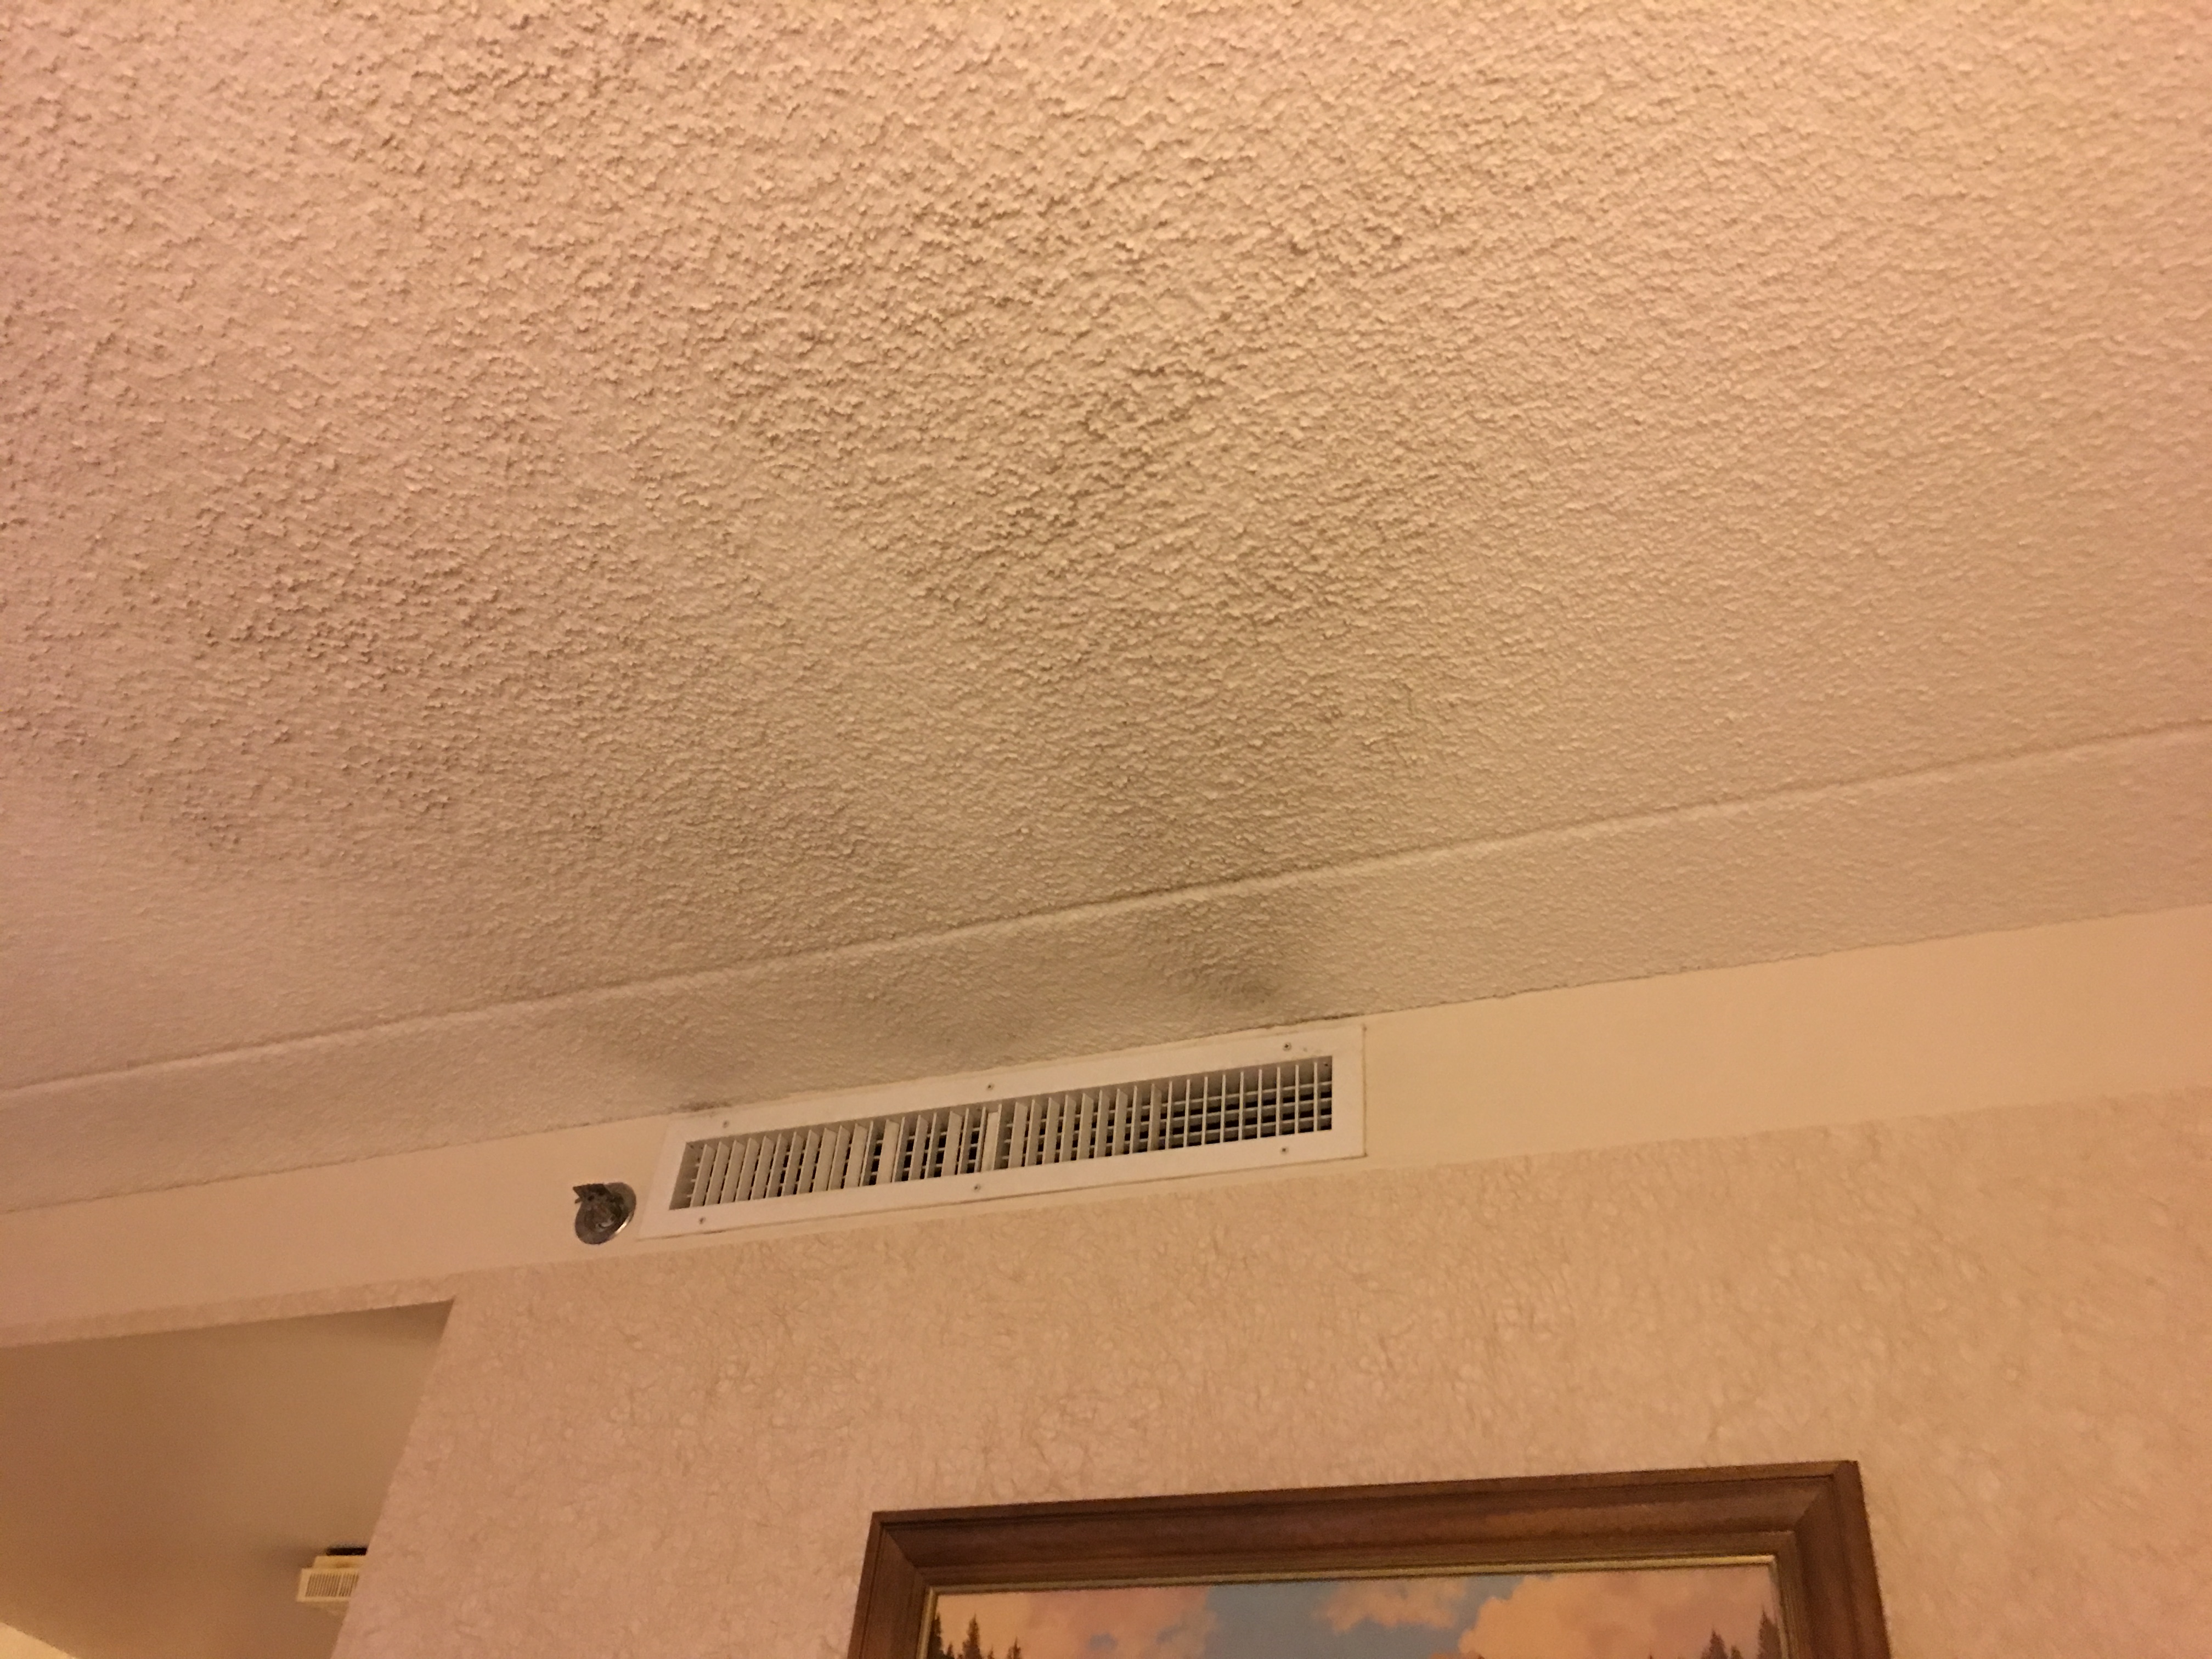 Smoke coming out of vents!  